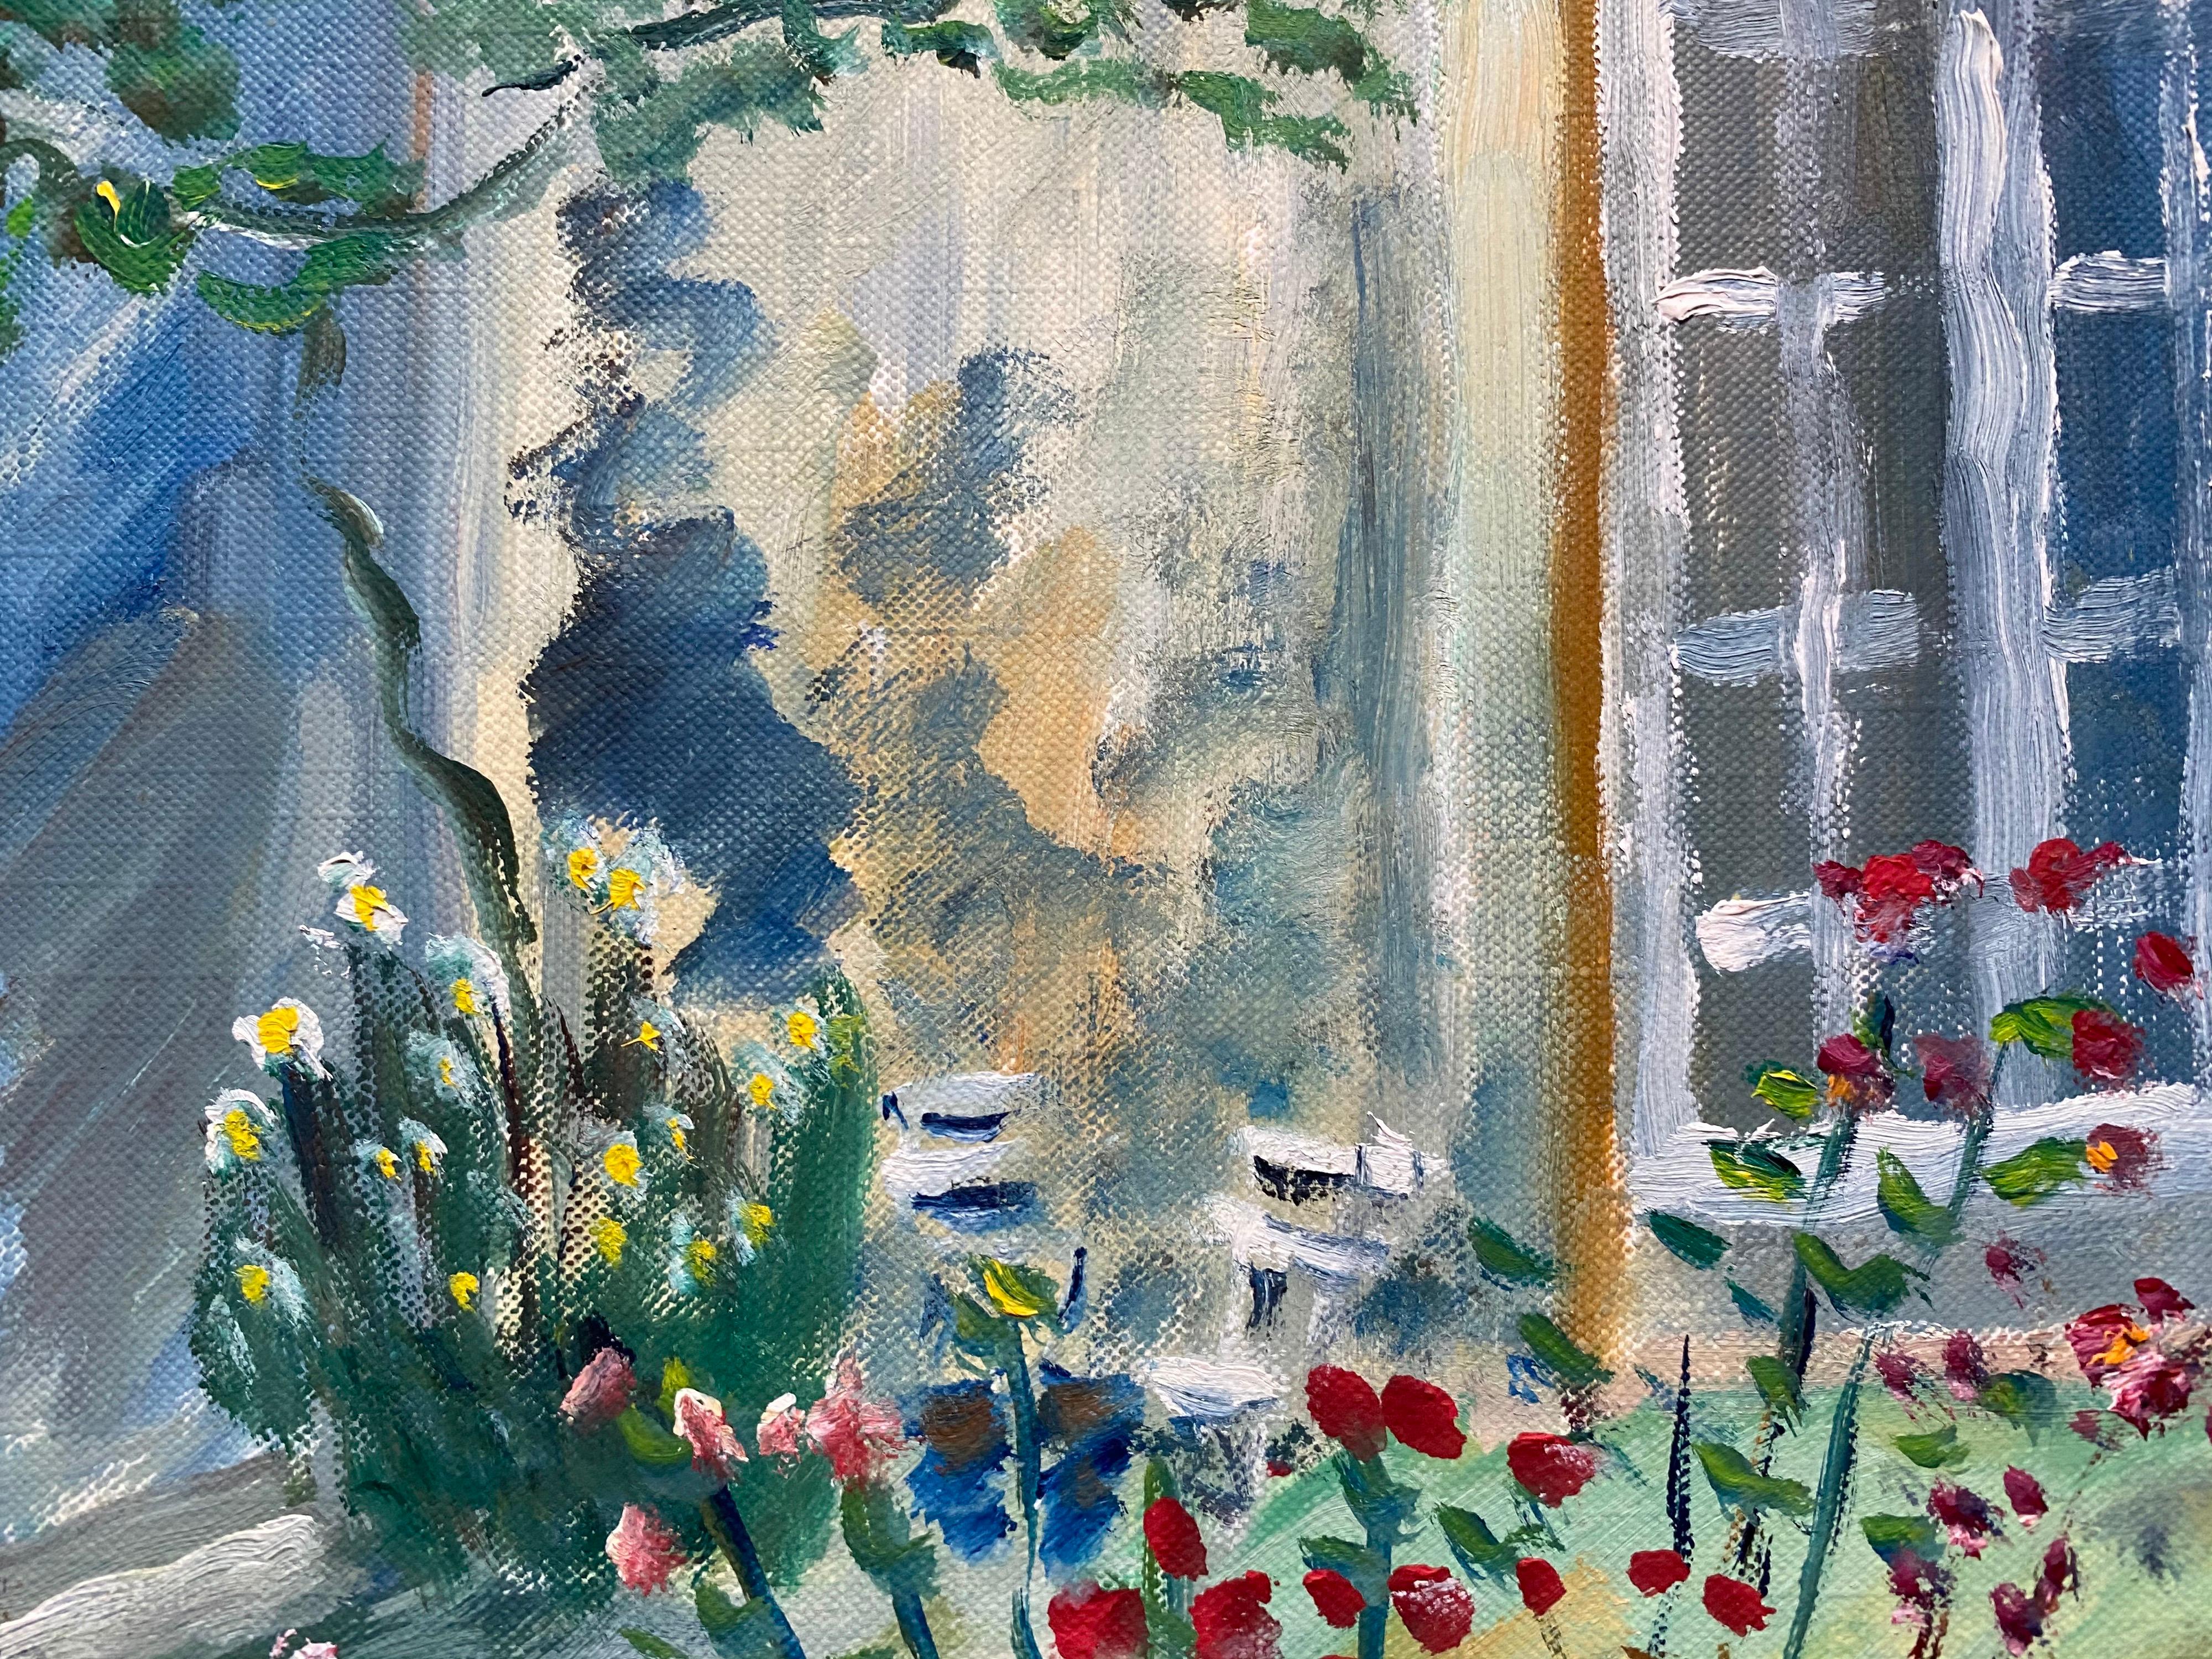 Beautiful French Landscape - Garden Flowers French Original Oil Painting - Gray Still-Life Painting by Unknown